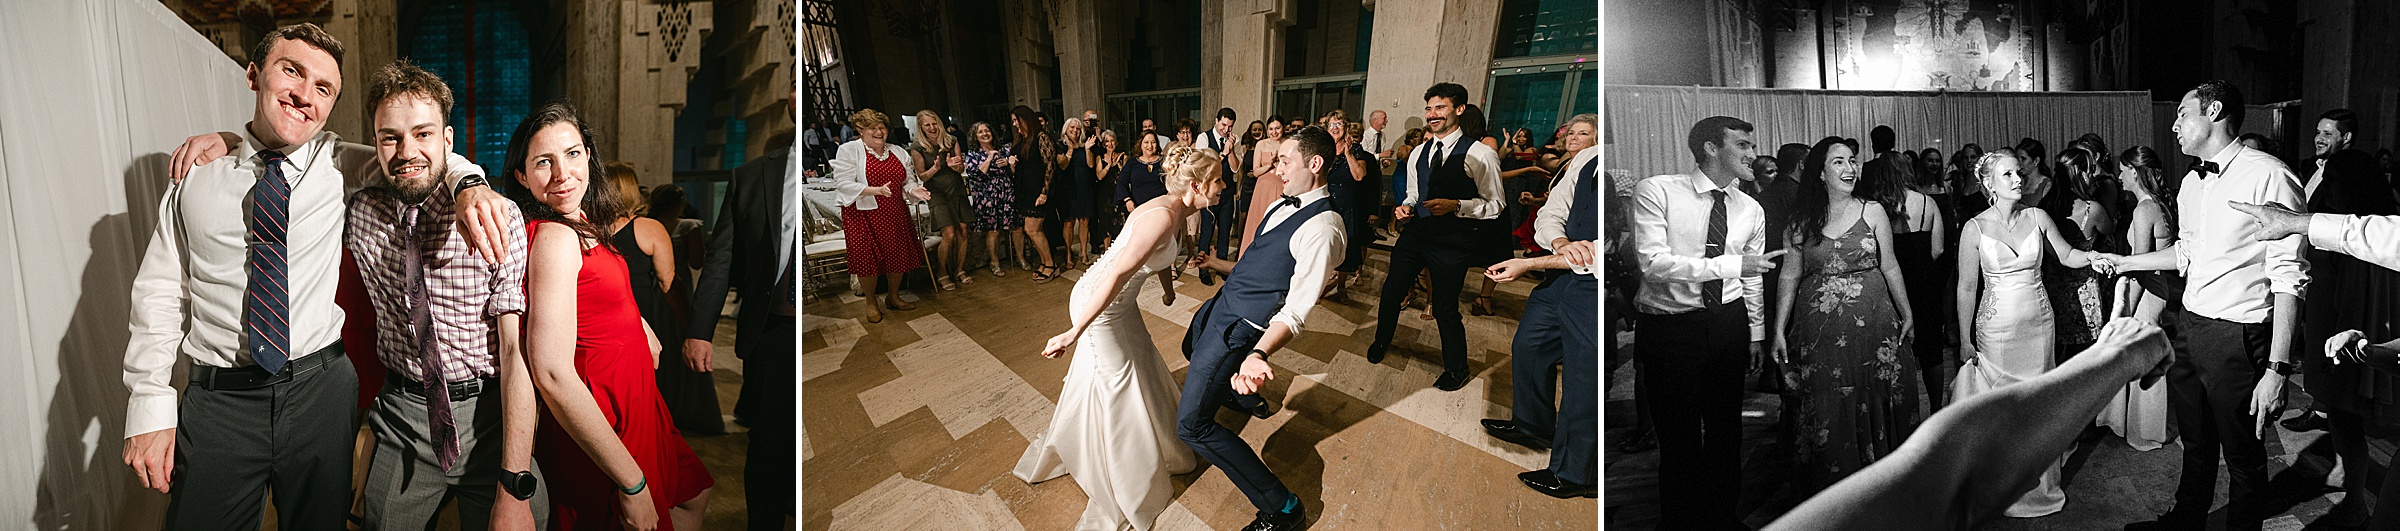 Dancing at a wedding  at the Guardian Building in Detroit by Michele Maloney Photography